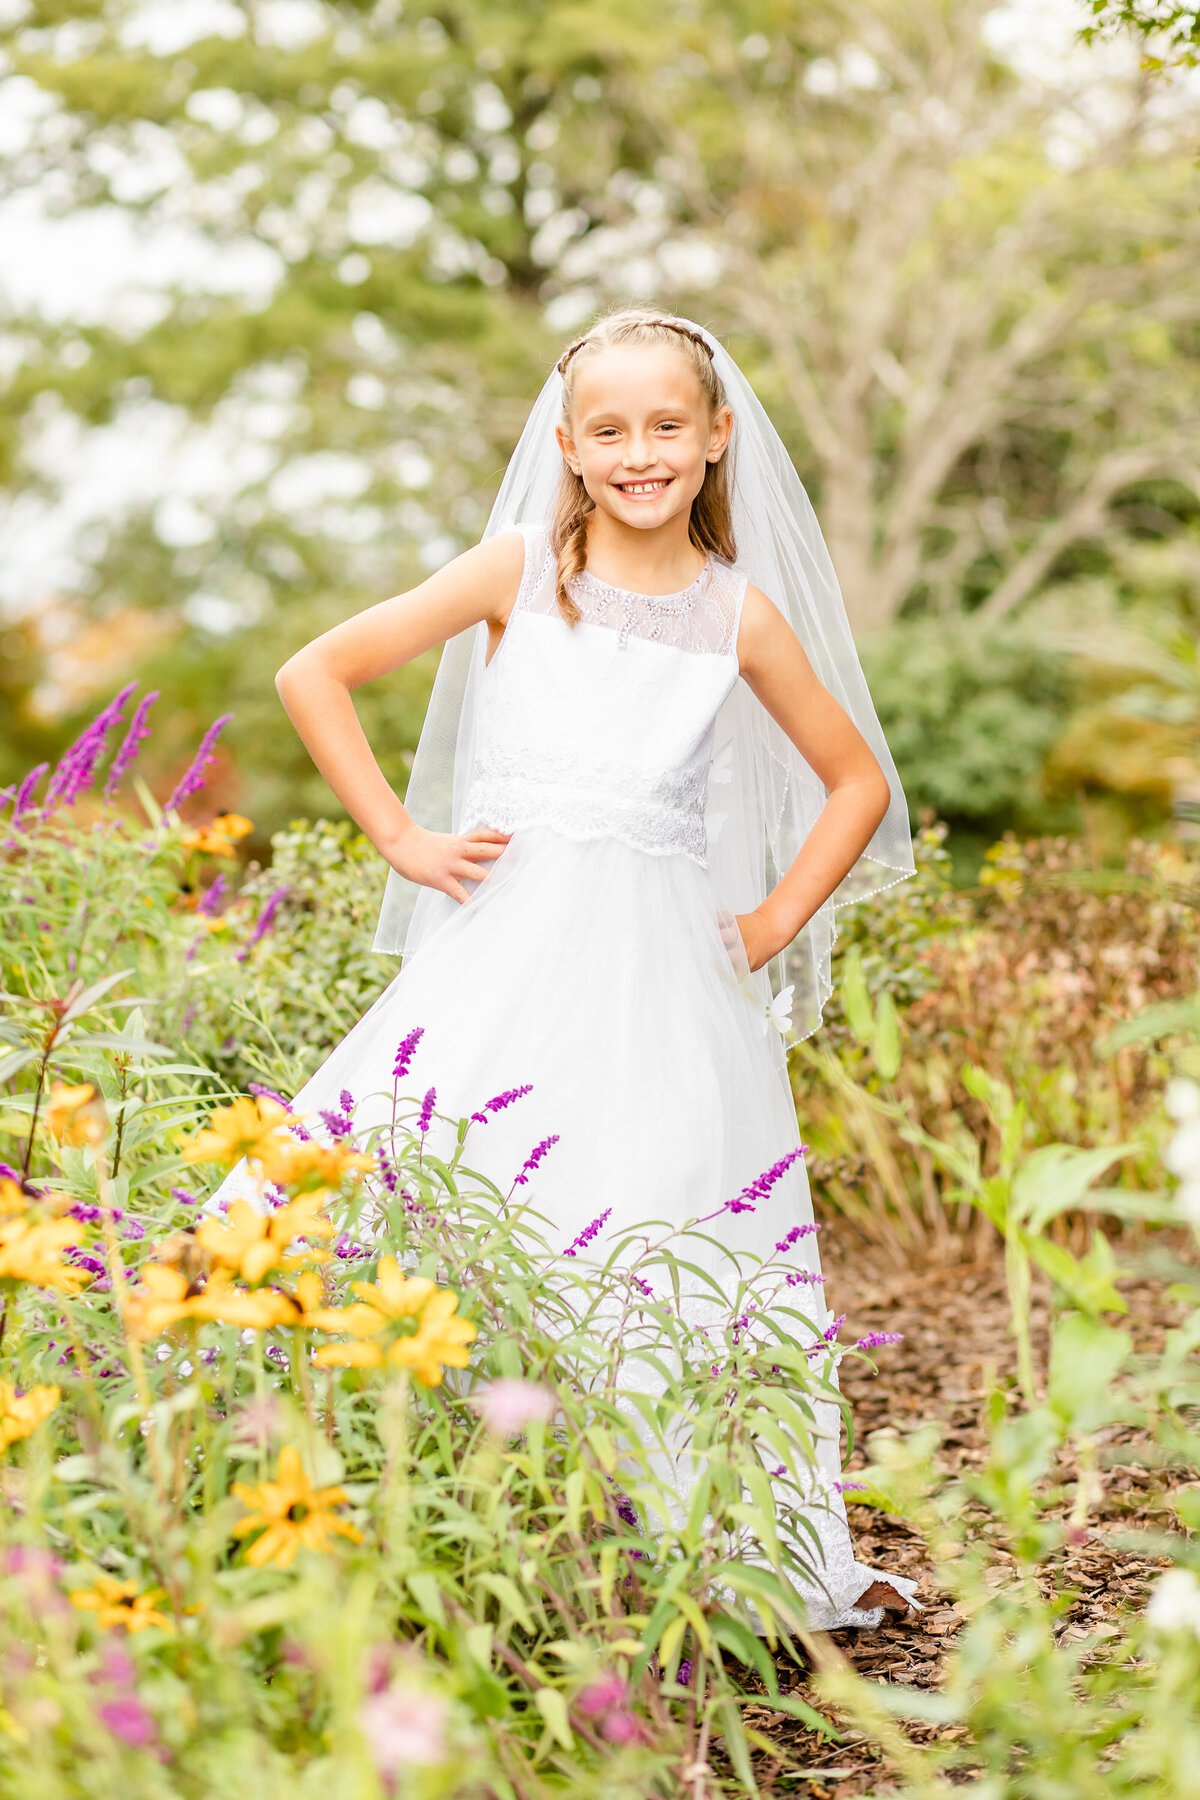 Girl's first communion standing in flowers with hands on hips smiling